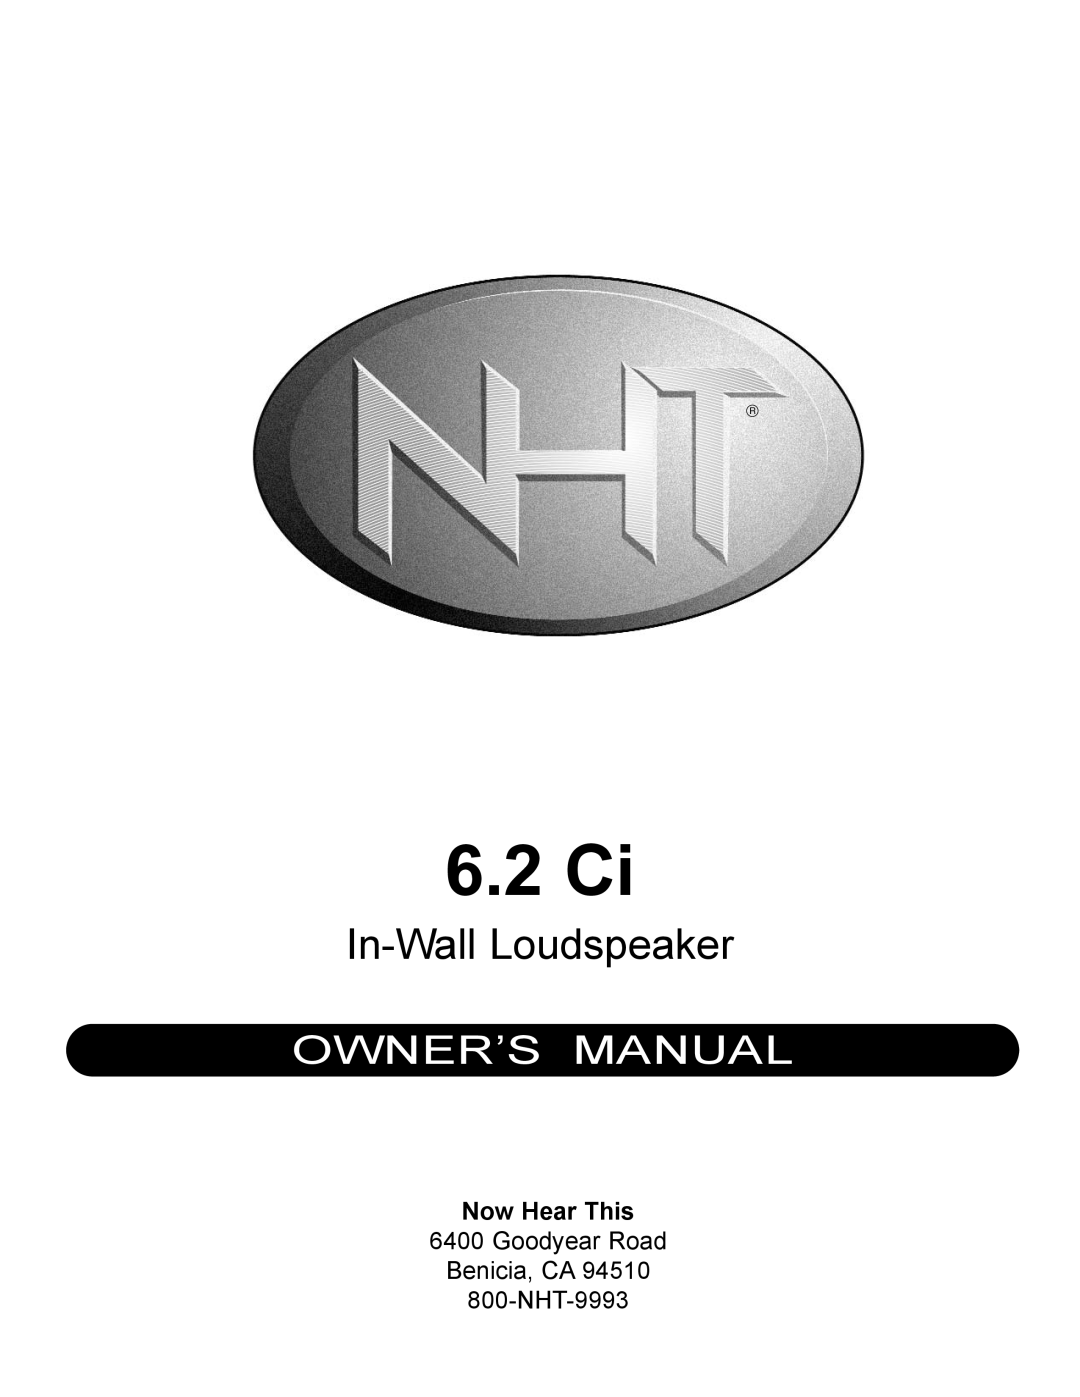 NHT 6.2 Ci owner manual In-WallLoudspeaker, Now Hear This, Goodyear Road Benicia, CA 800-NHT-9993 